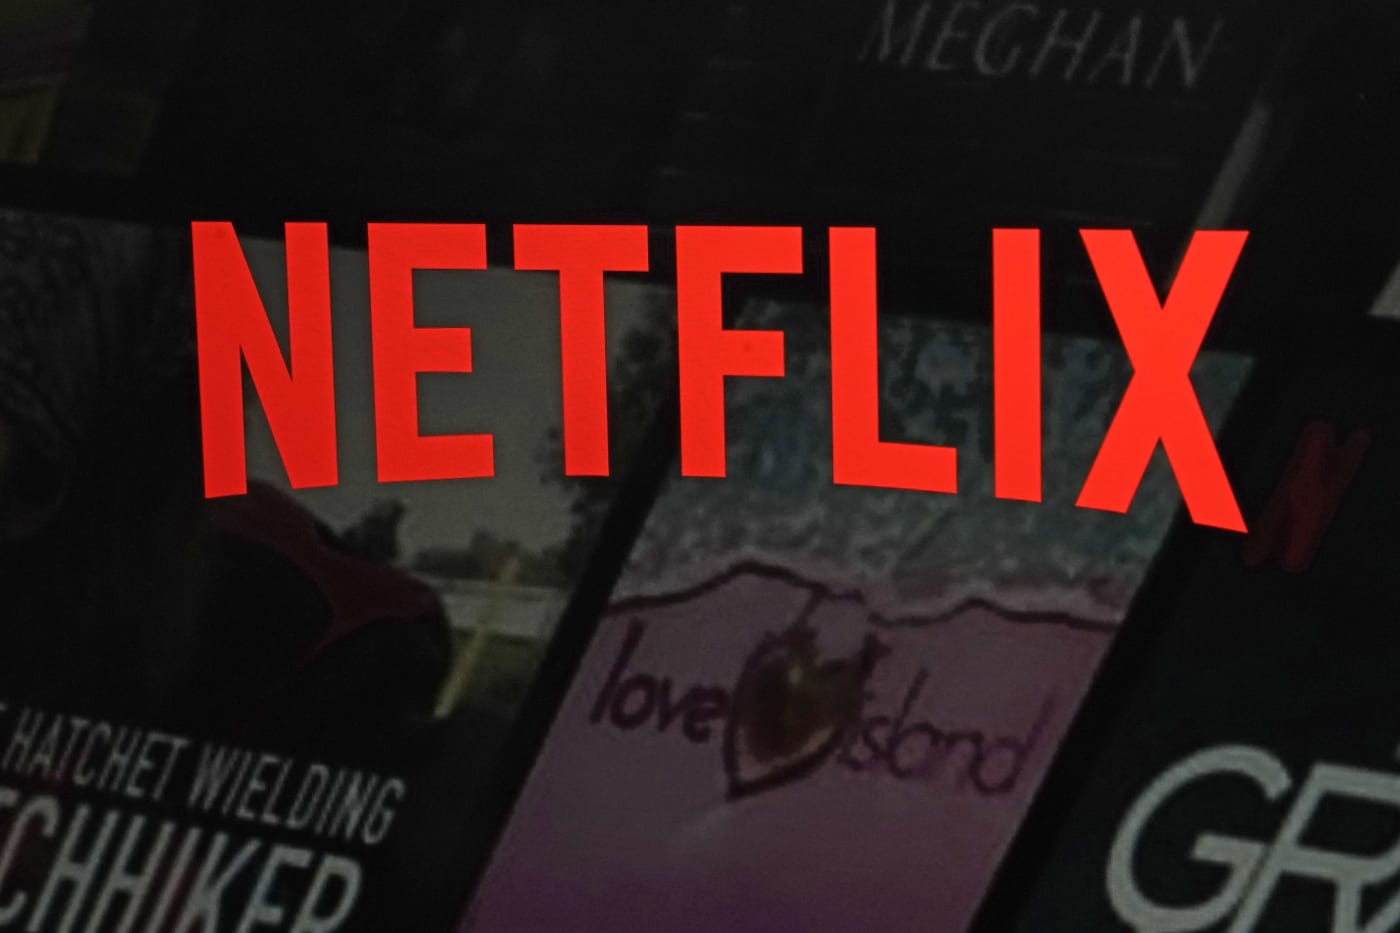 You might need to upgrade your Apple TV box to keep watching Netflix